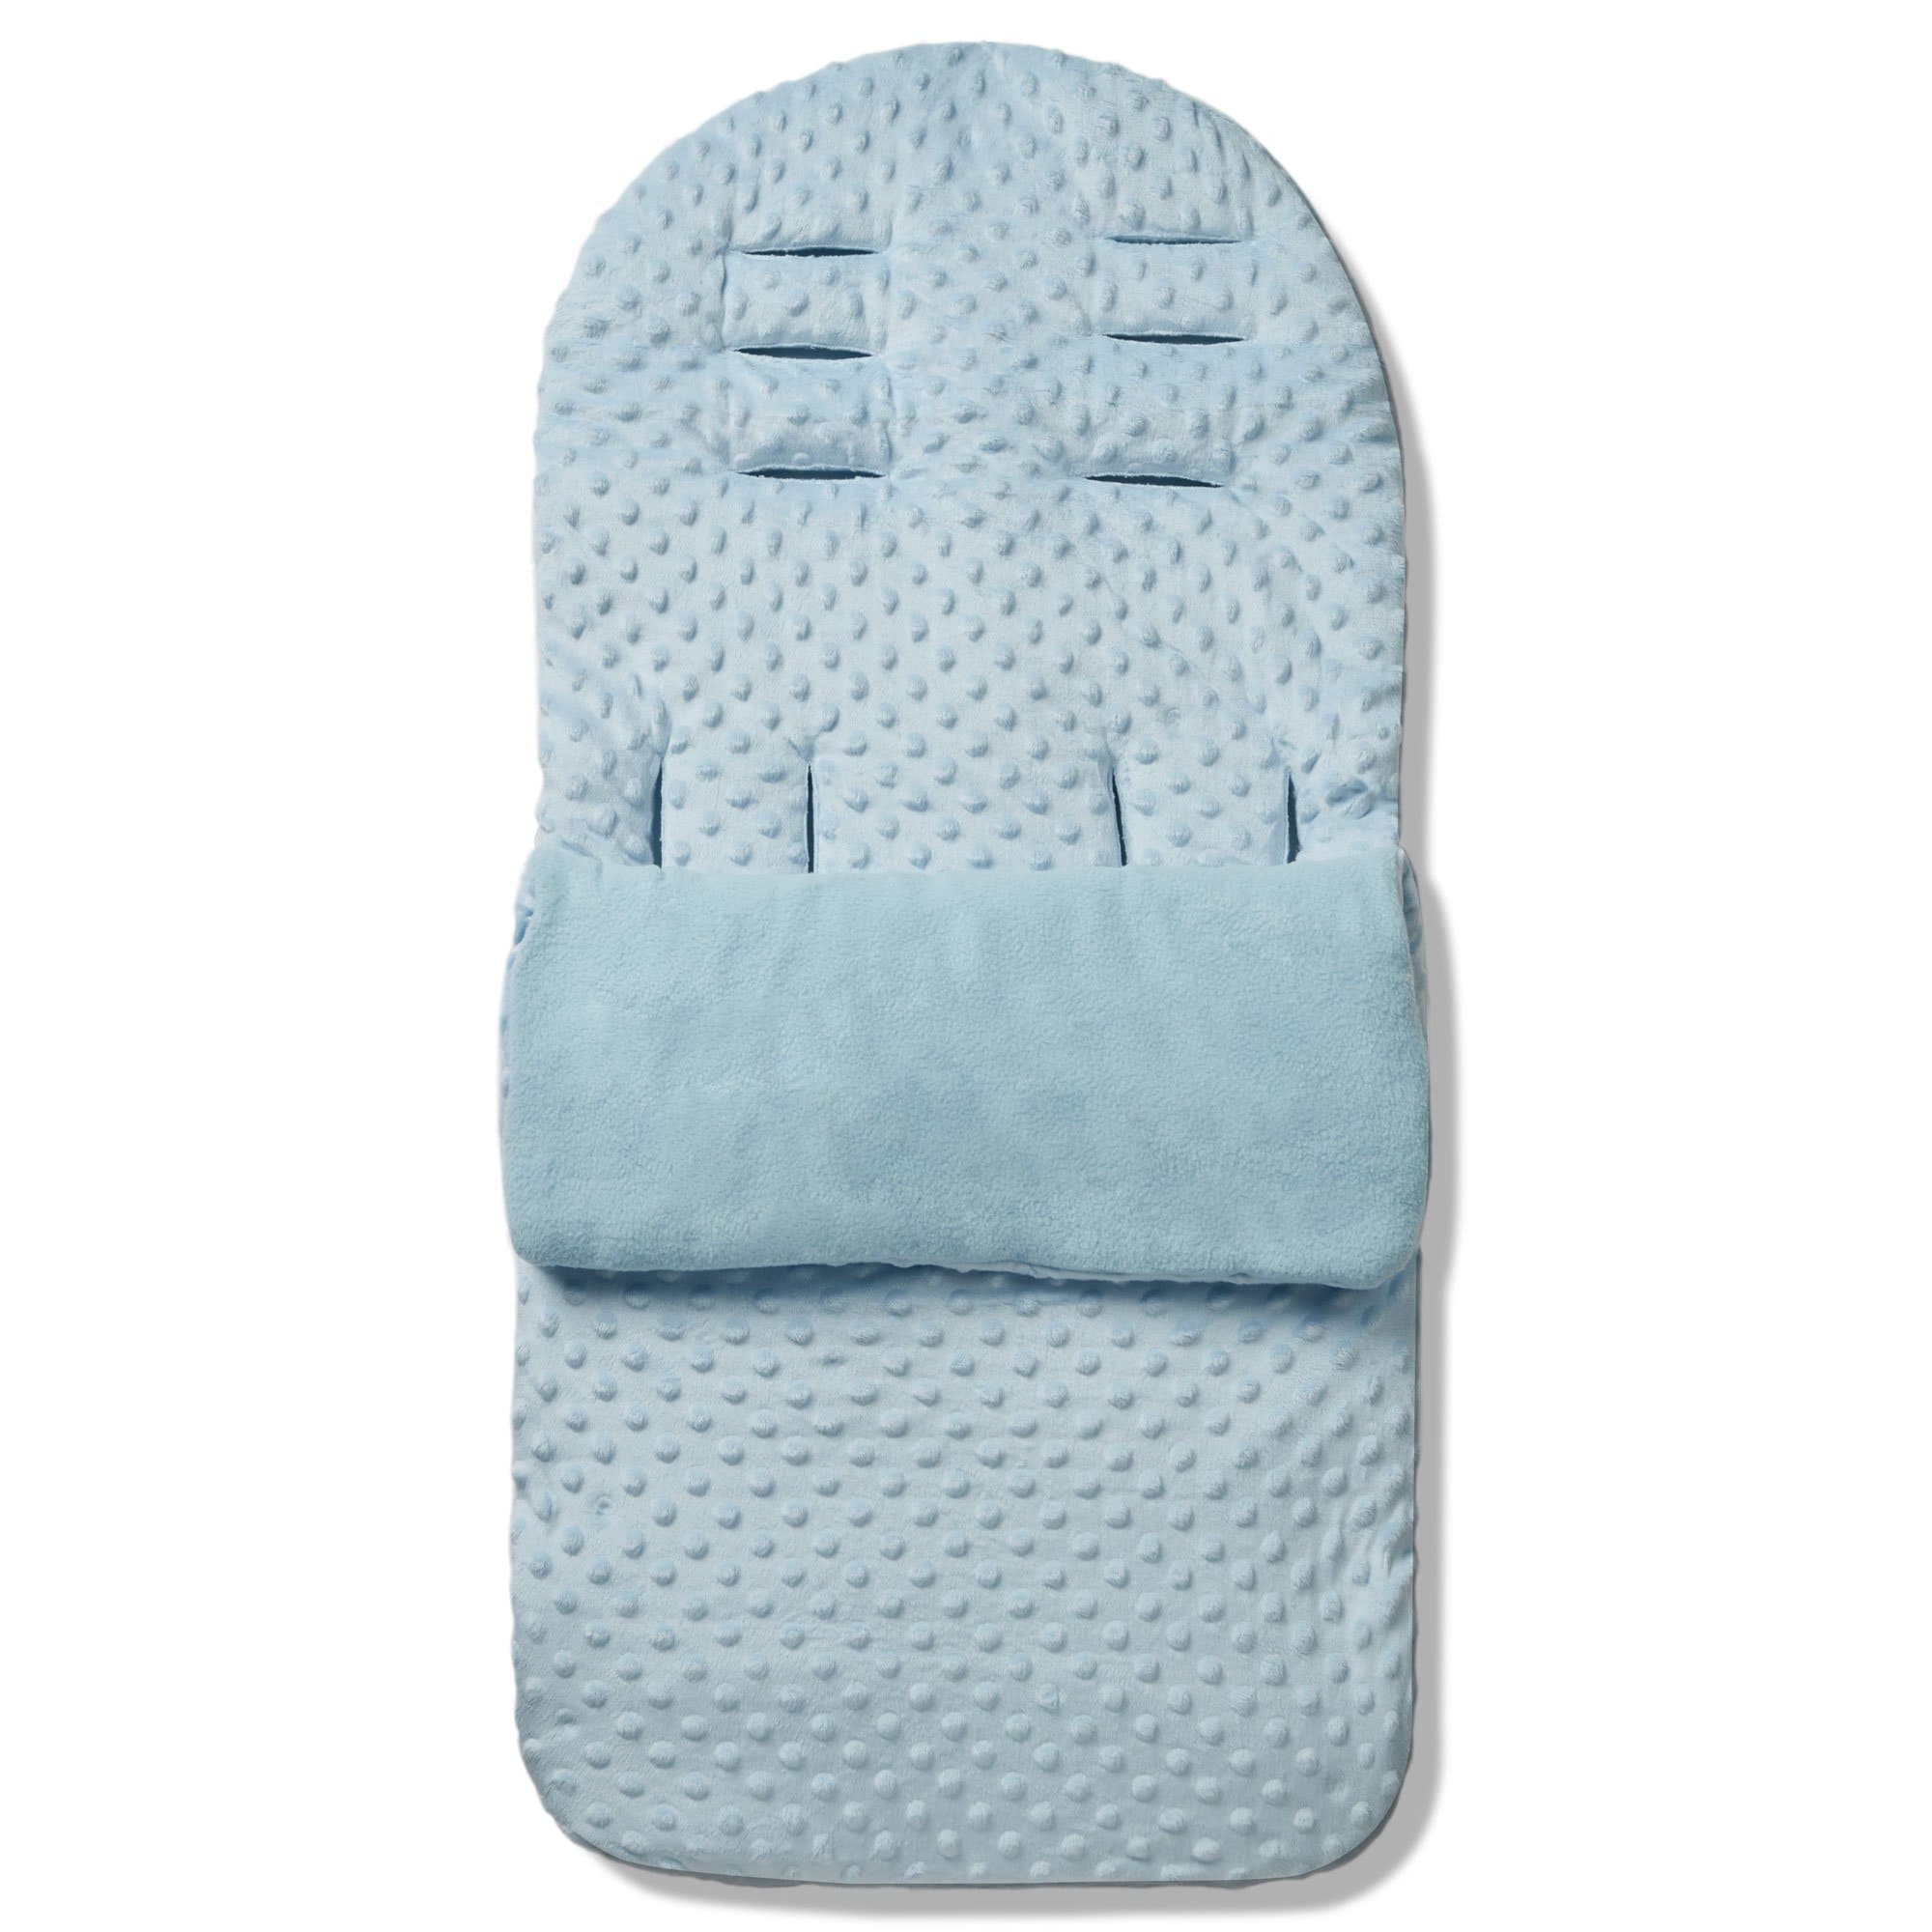 Dimple Footmuff / Cosy Toes Compatible with Bebe Confort - Blue / Fits All Models | For Your Little One